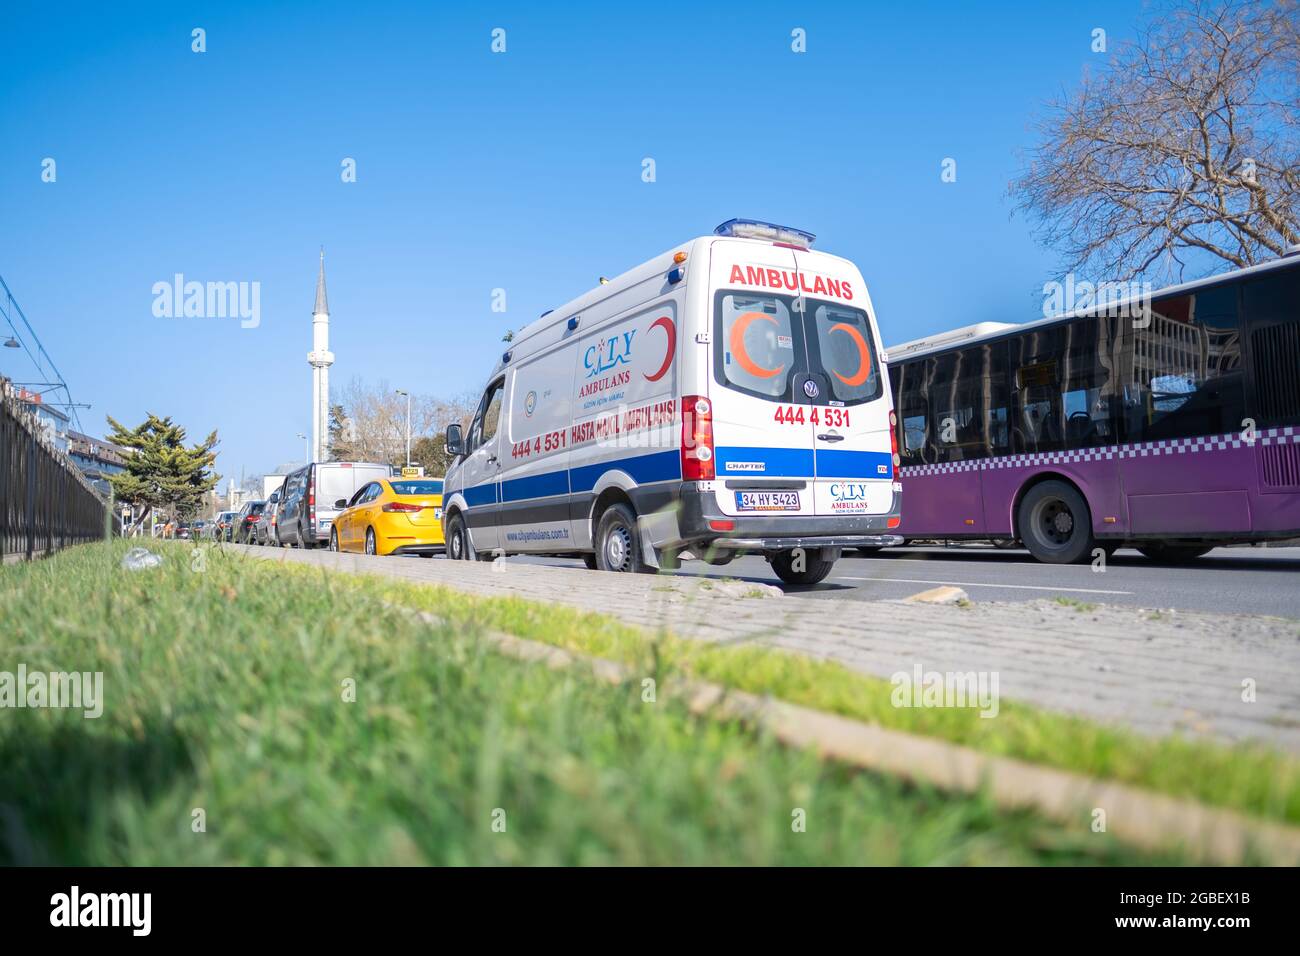 Findikli, Istanbul, Turkey - 02.26.2021: ambulance is on way in a traffic jam in Istanbul road near sea with copy space Stock Photo